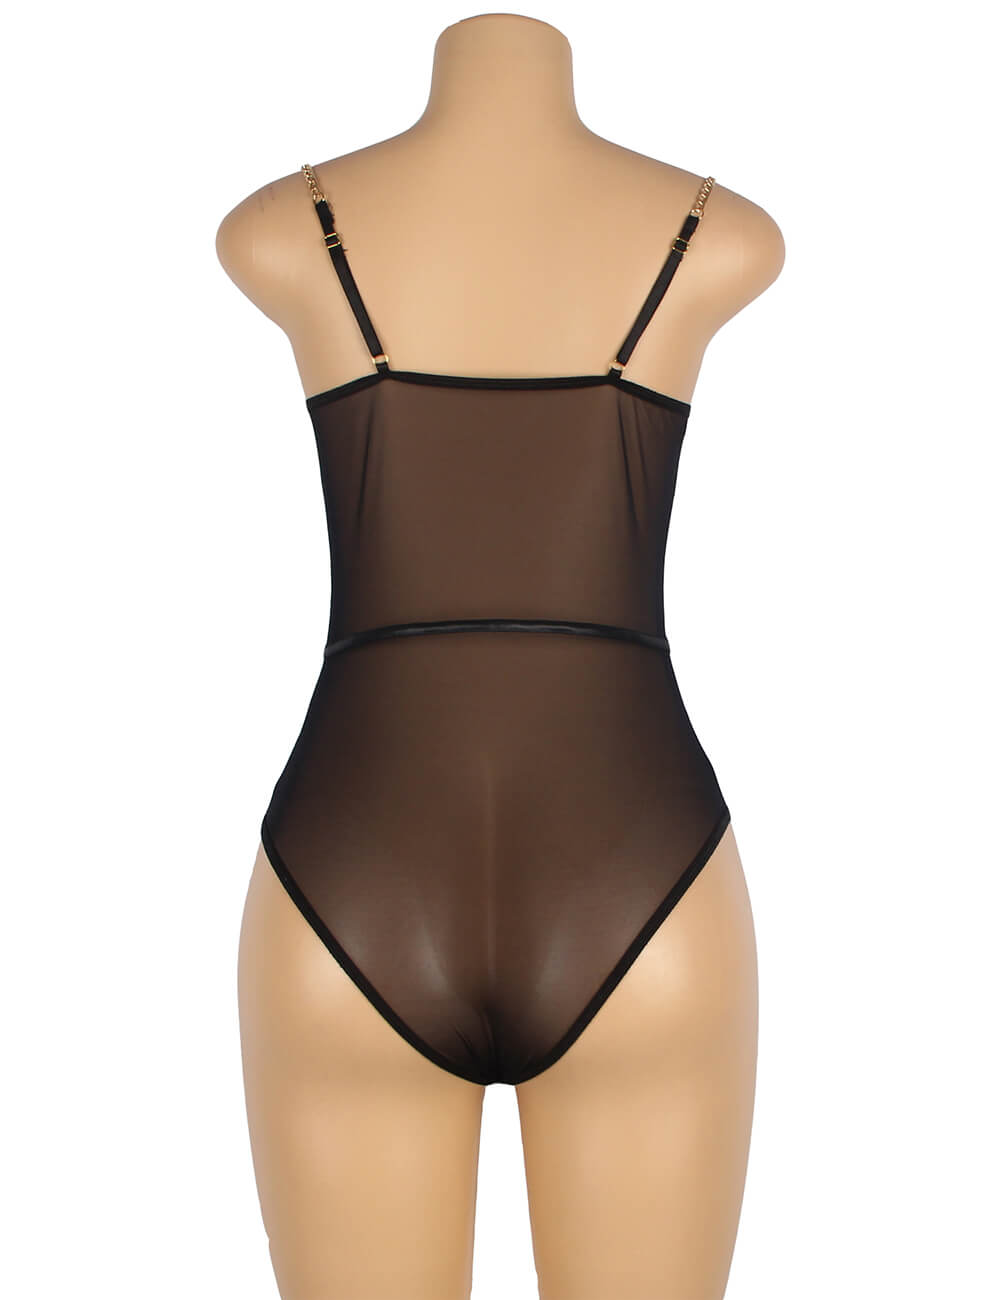 Women's Sexy Bodysuits Jumpsuits Erotic Romper See Through Lingeries